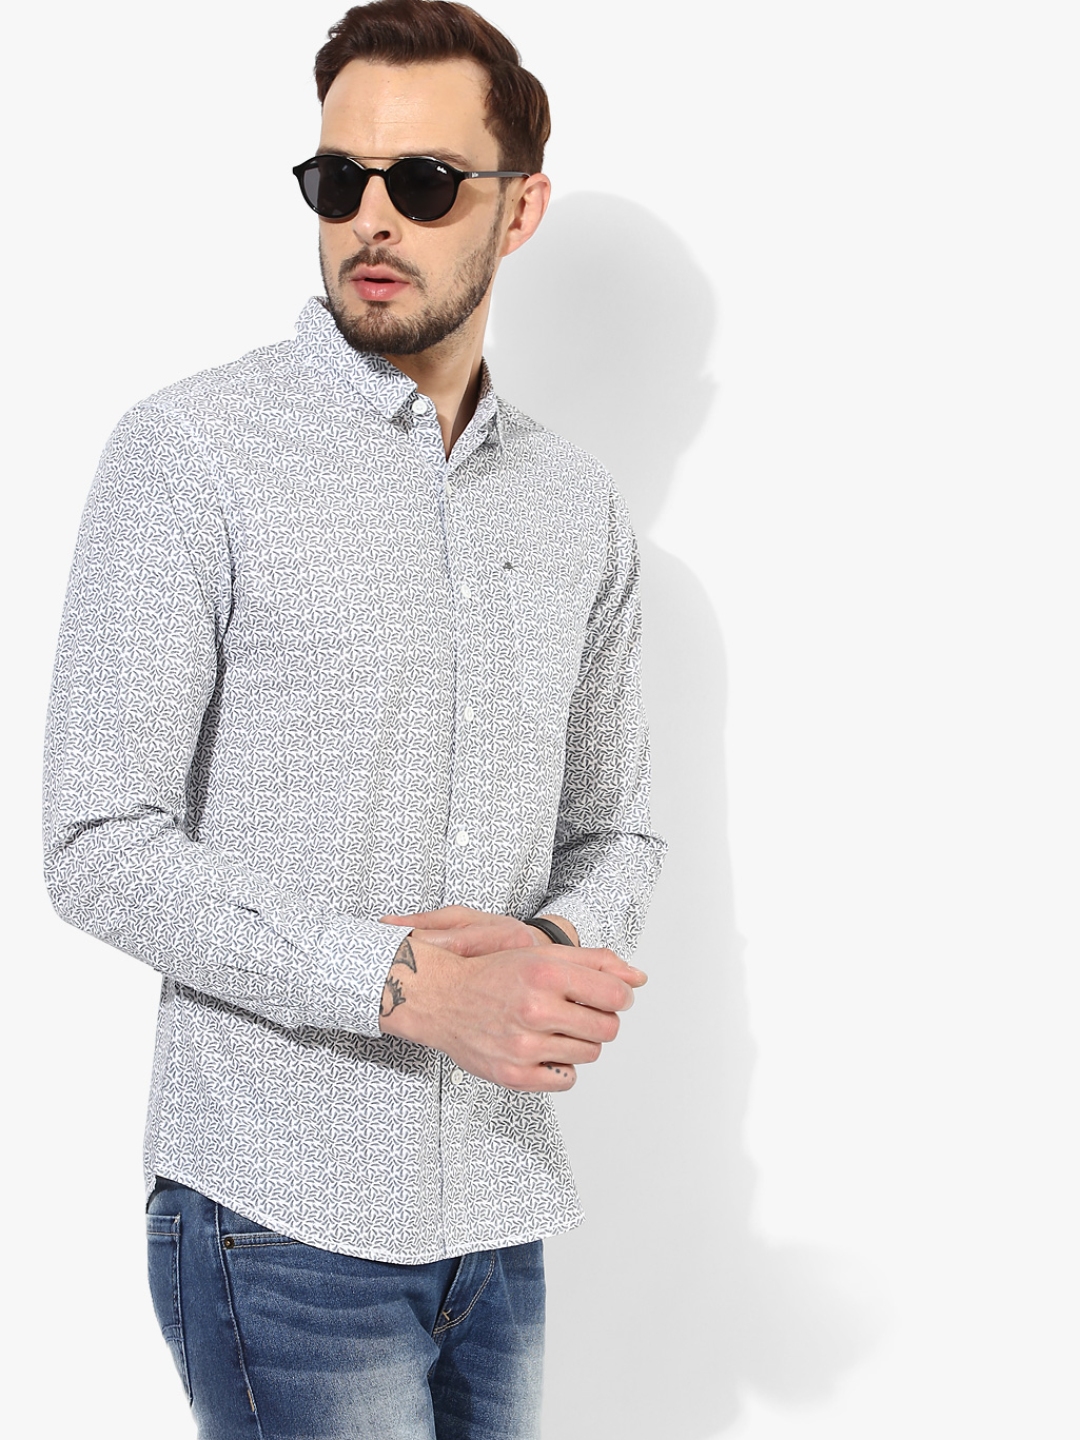 Buy White Printed Slim Fit Casual Shirt - Shirts for Men 7932469 | Myntra